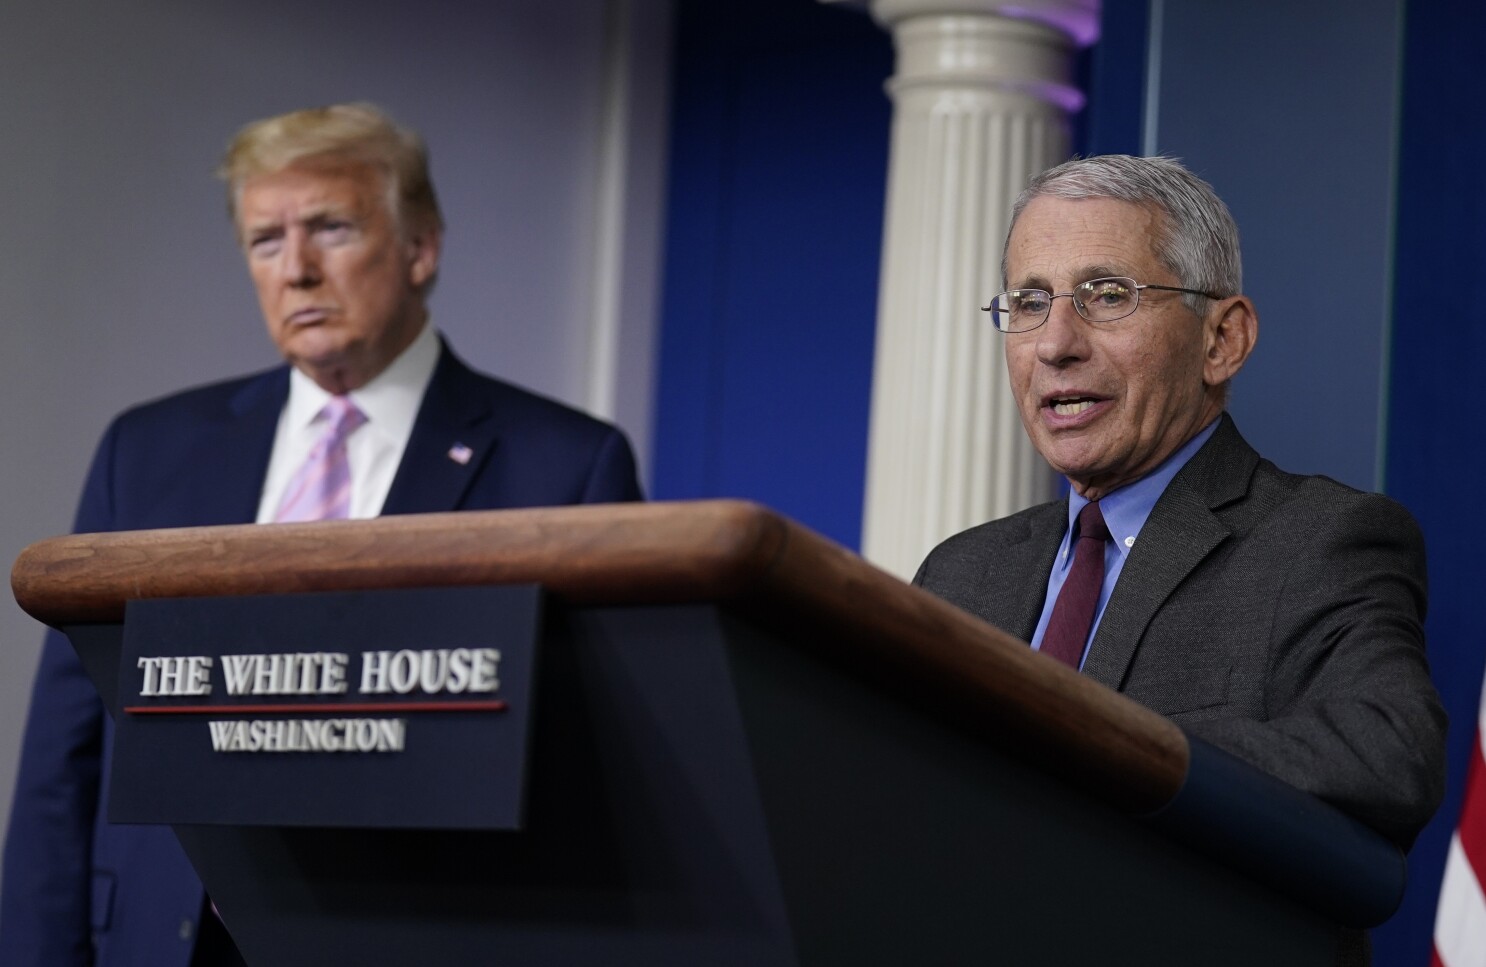 The shaming of Dr. Fauci at Trump's news conference from hell ...